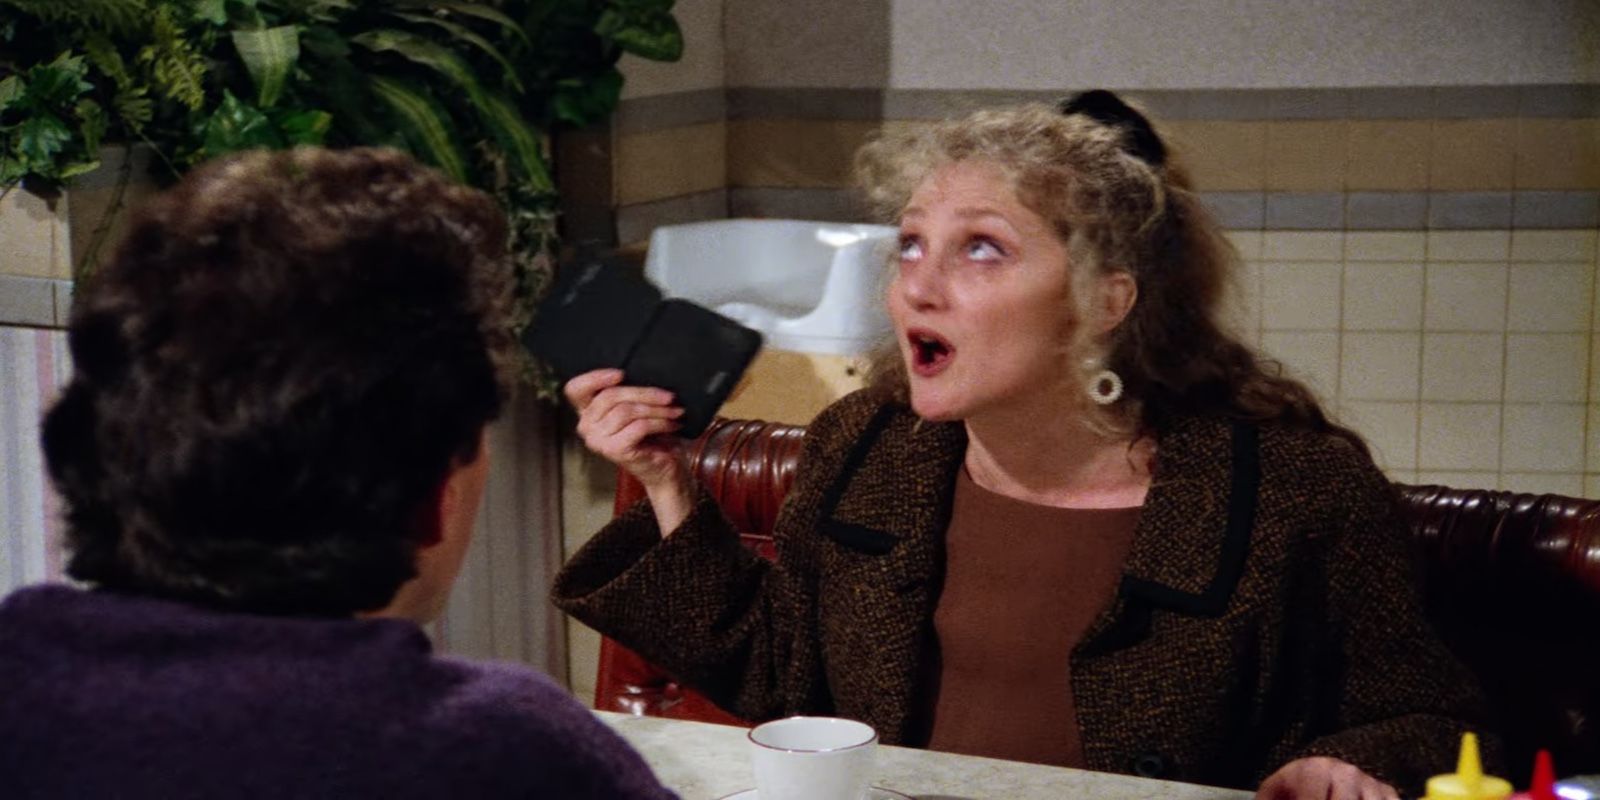 Corinne, played by Carol Kane, gives Jerry, played by Jerry Seinfeld, an electronic organizer